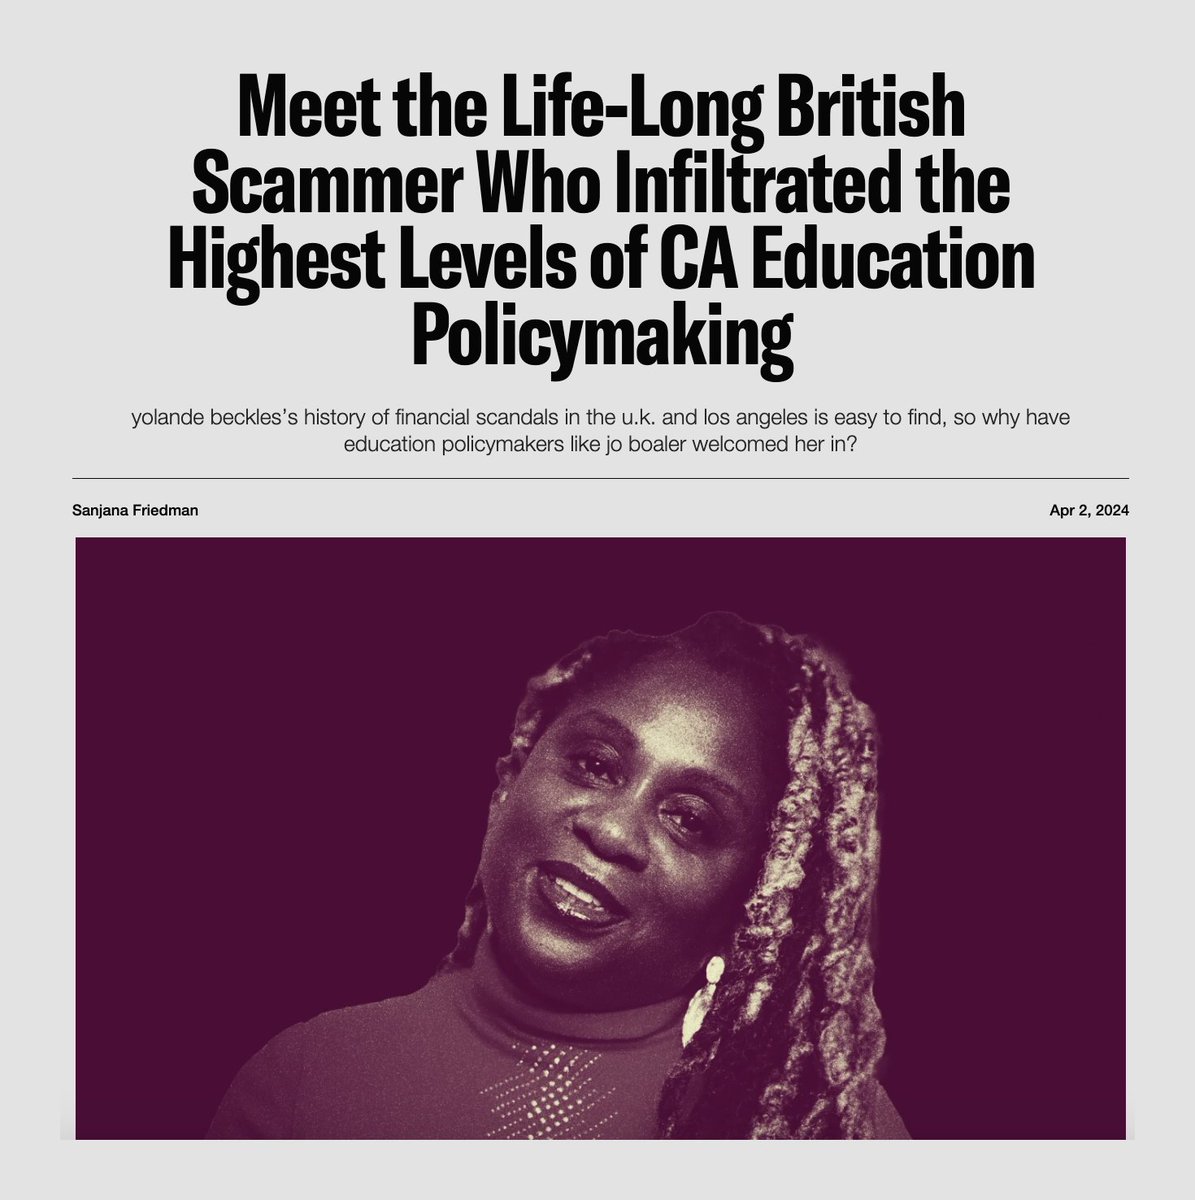 'A disgraced education 'guru' and reality TV star, who vanished from Britain after becoming embroiled in a string of financial scandals.' That's how The Independent described California “math equity” policy consultant Yolande Beckles — a woman who left her native U.K. with 19